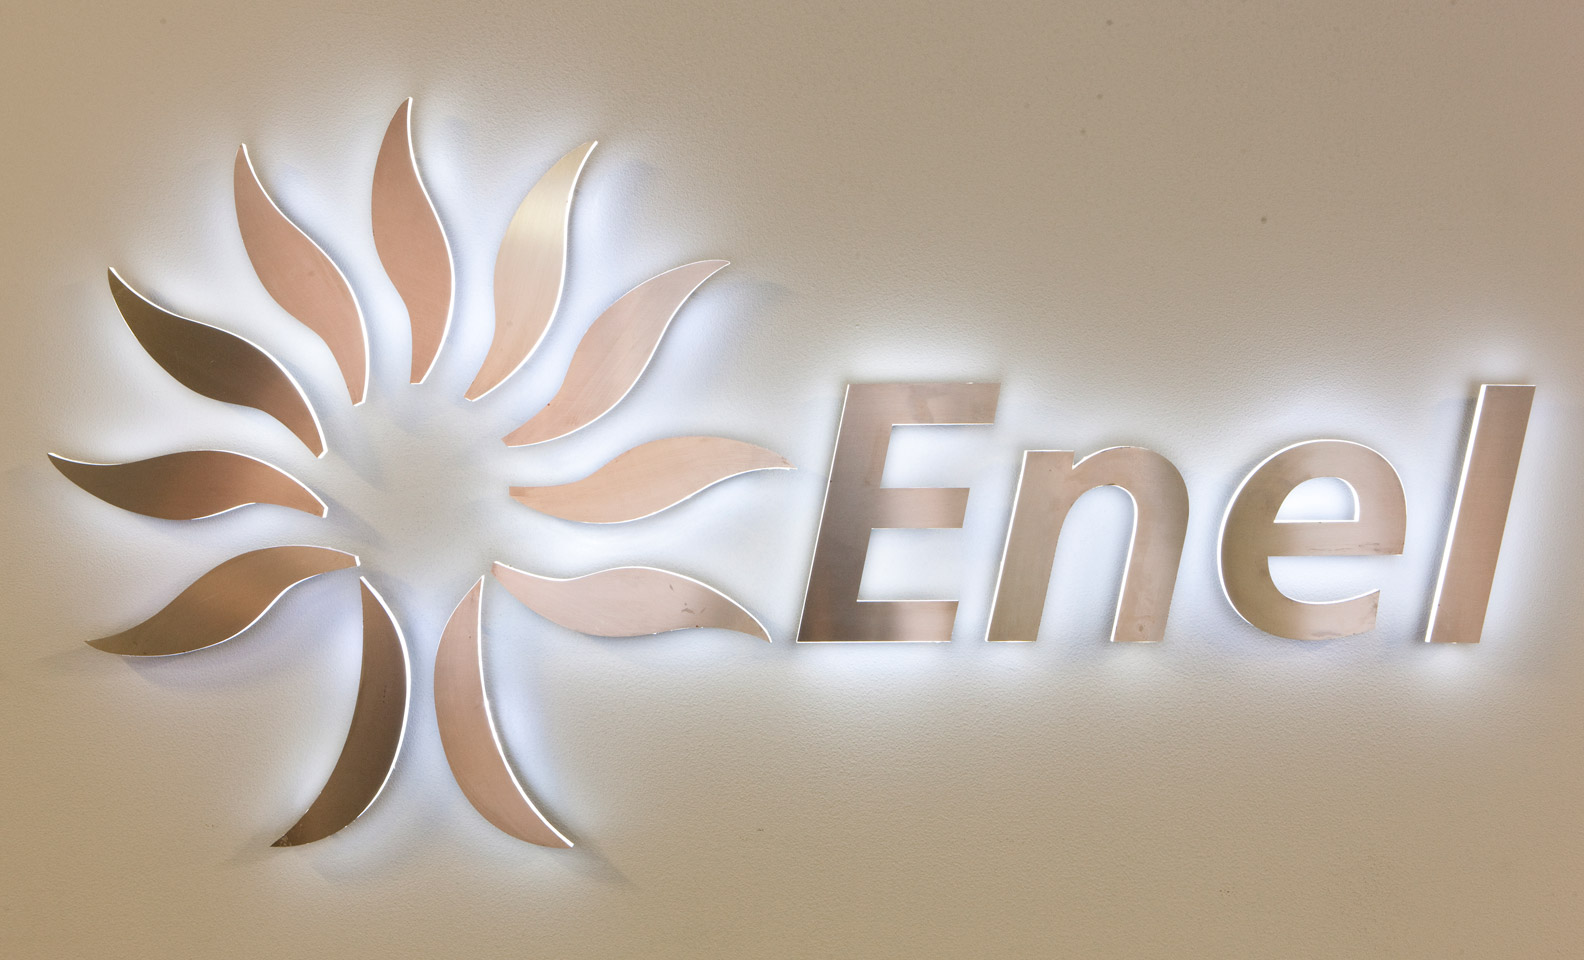 Corporate social responsibility: Enel receives awards in New York